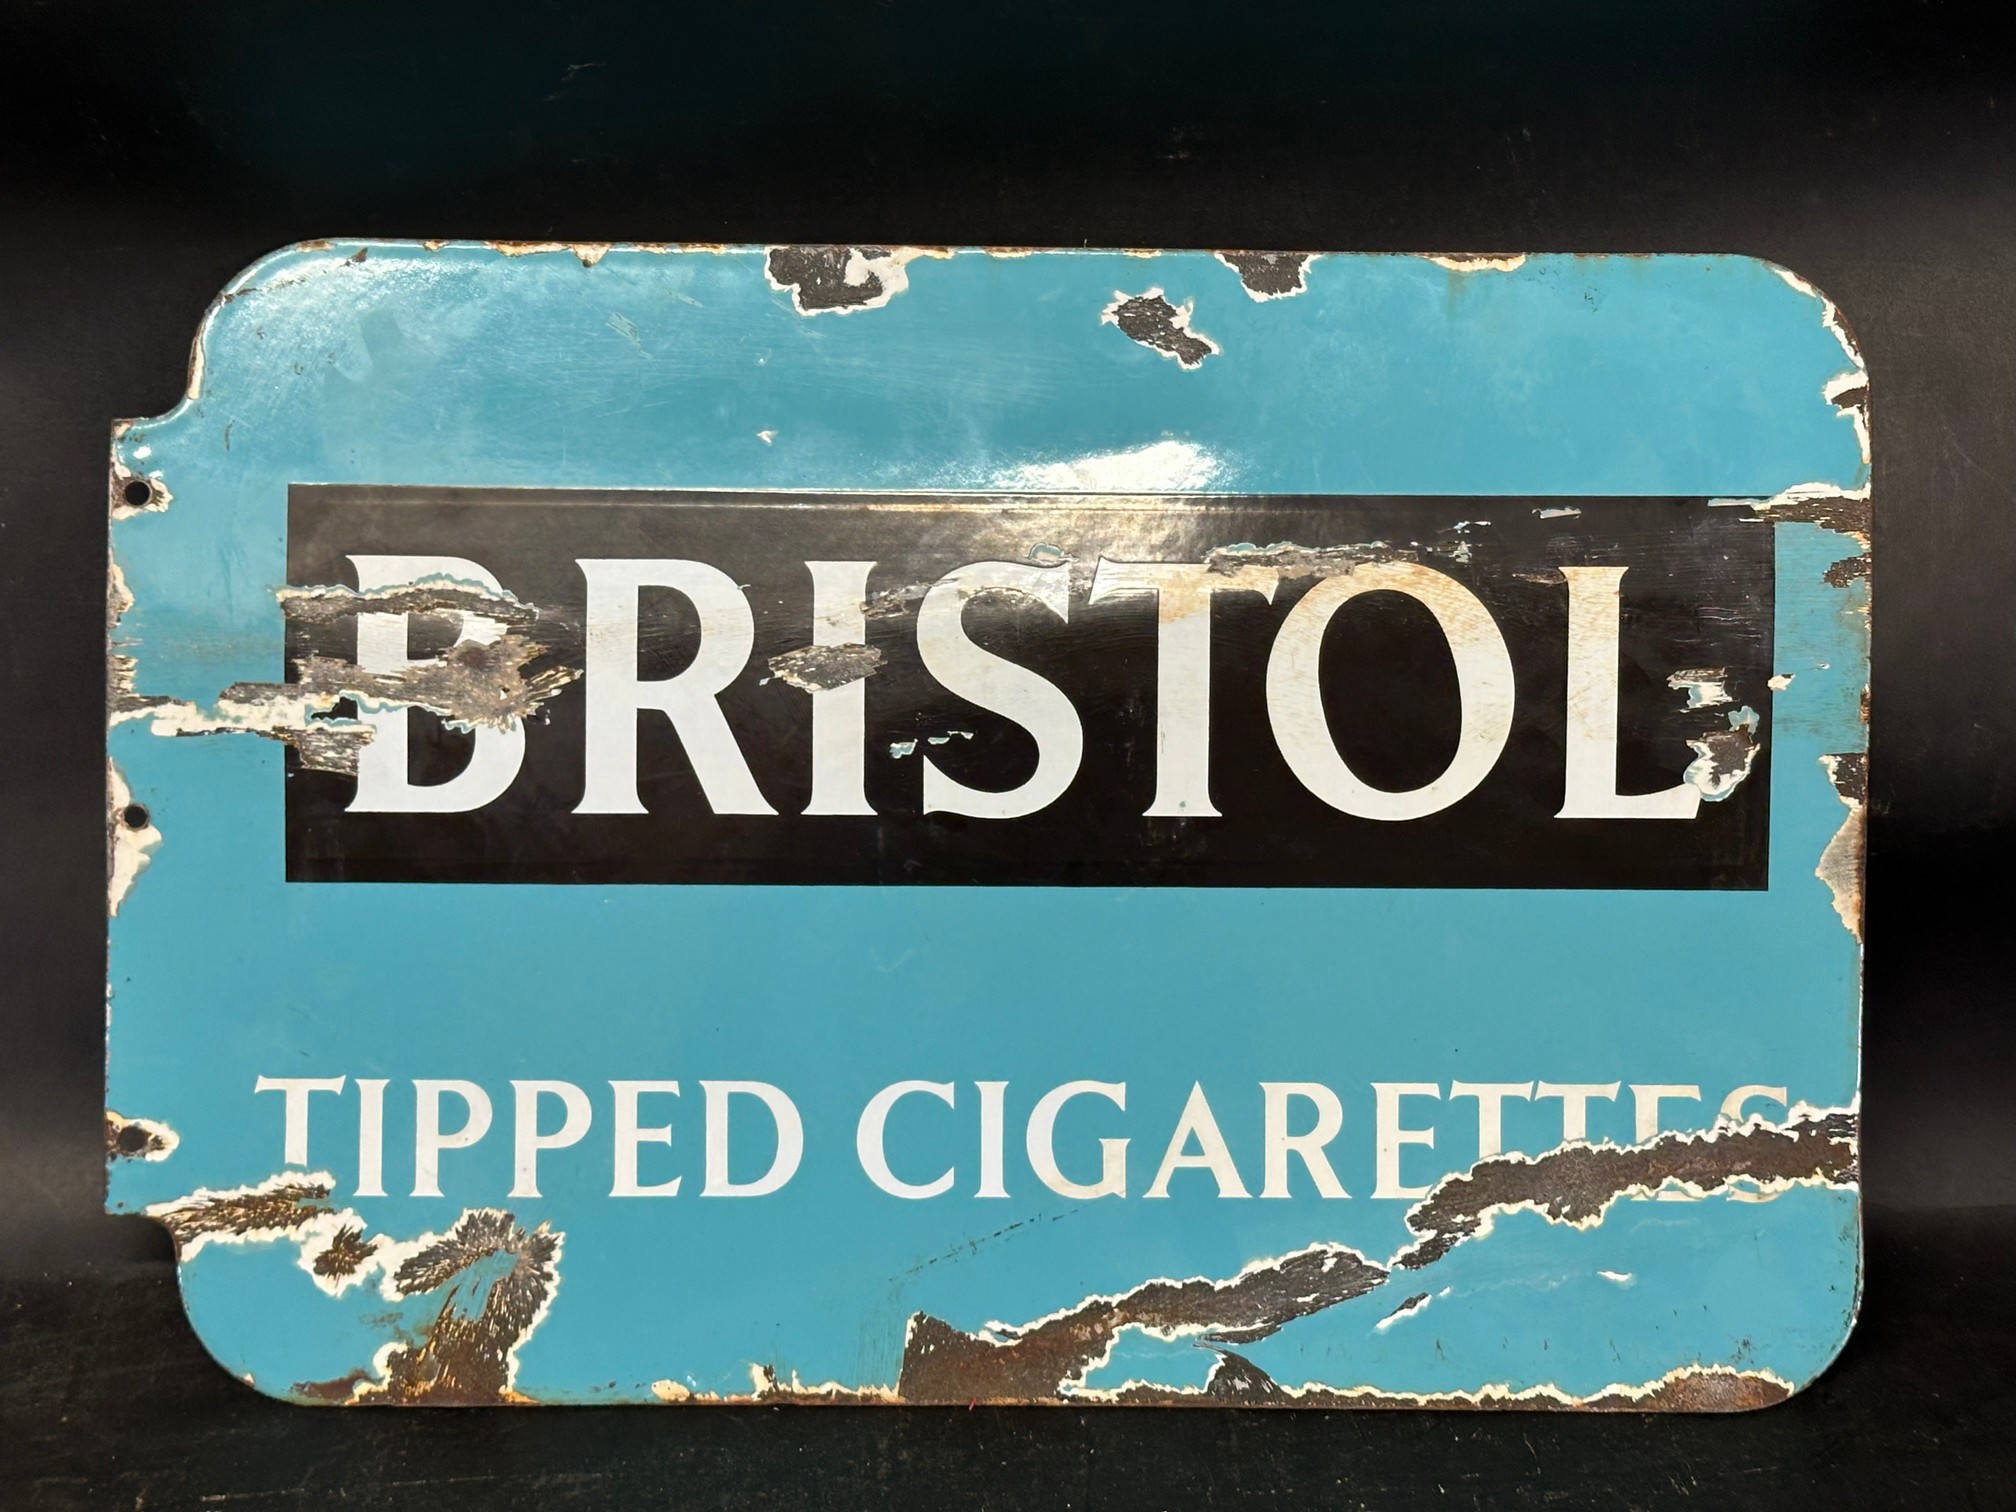 A Bristol Tipped Cigarettes and Kingsway tipped cigarettes double sided enamel advertising sign,